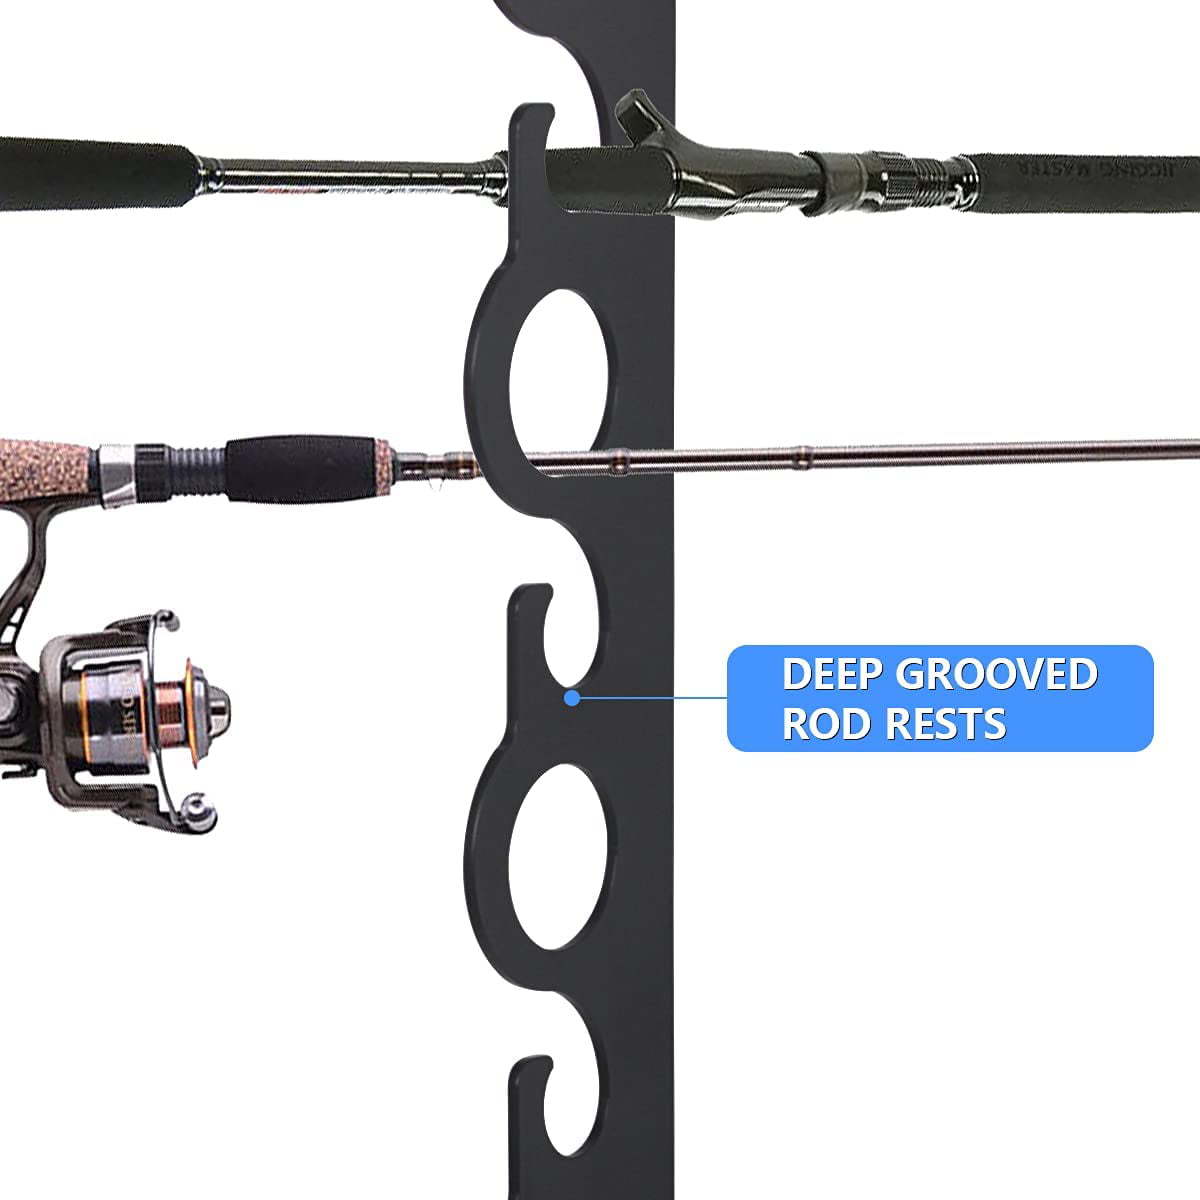 Fishing Pole Holder Wall or Ceiling Mount Rack, Fishing Rod